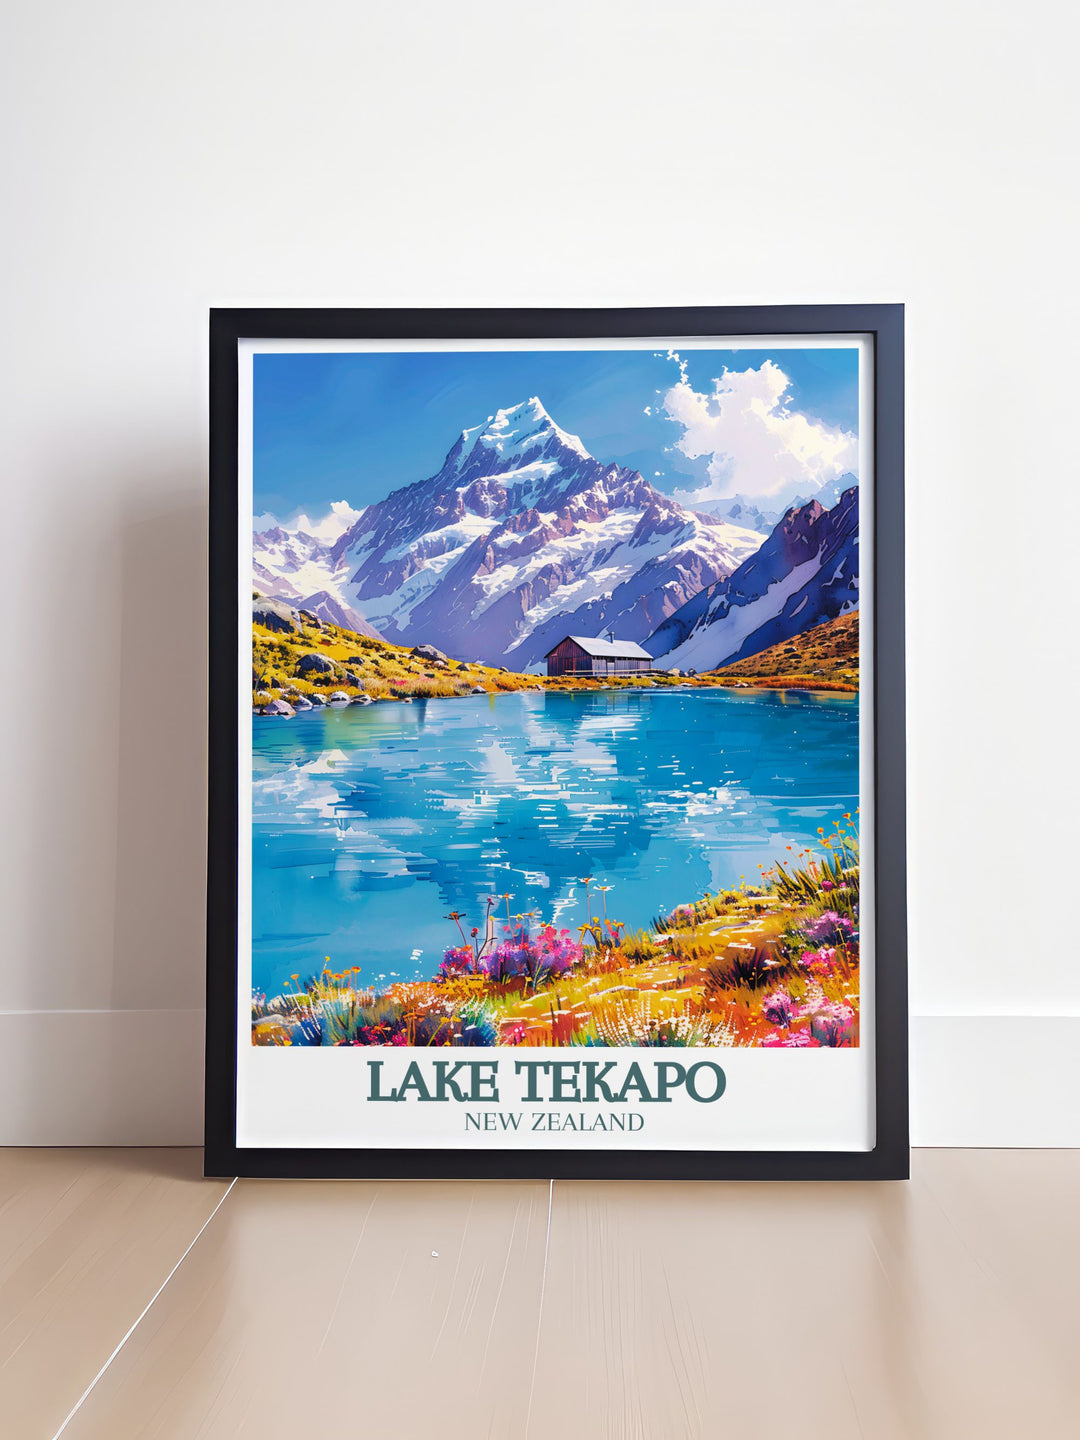 Uncover the majestic landscapes of Lake Tekapo, with its striking turquoise waters, set against the backdrop of the Southern Alps. Perfect for nature lovers, this artwork captures the serene beauty of one of New Zealands most iconic locations.